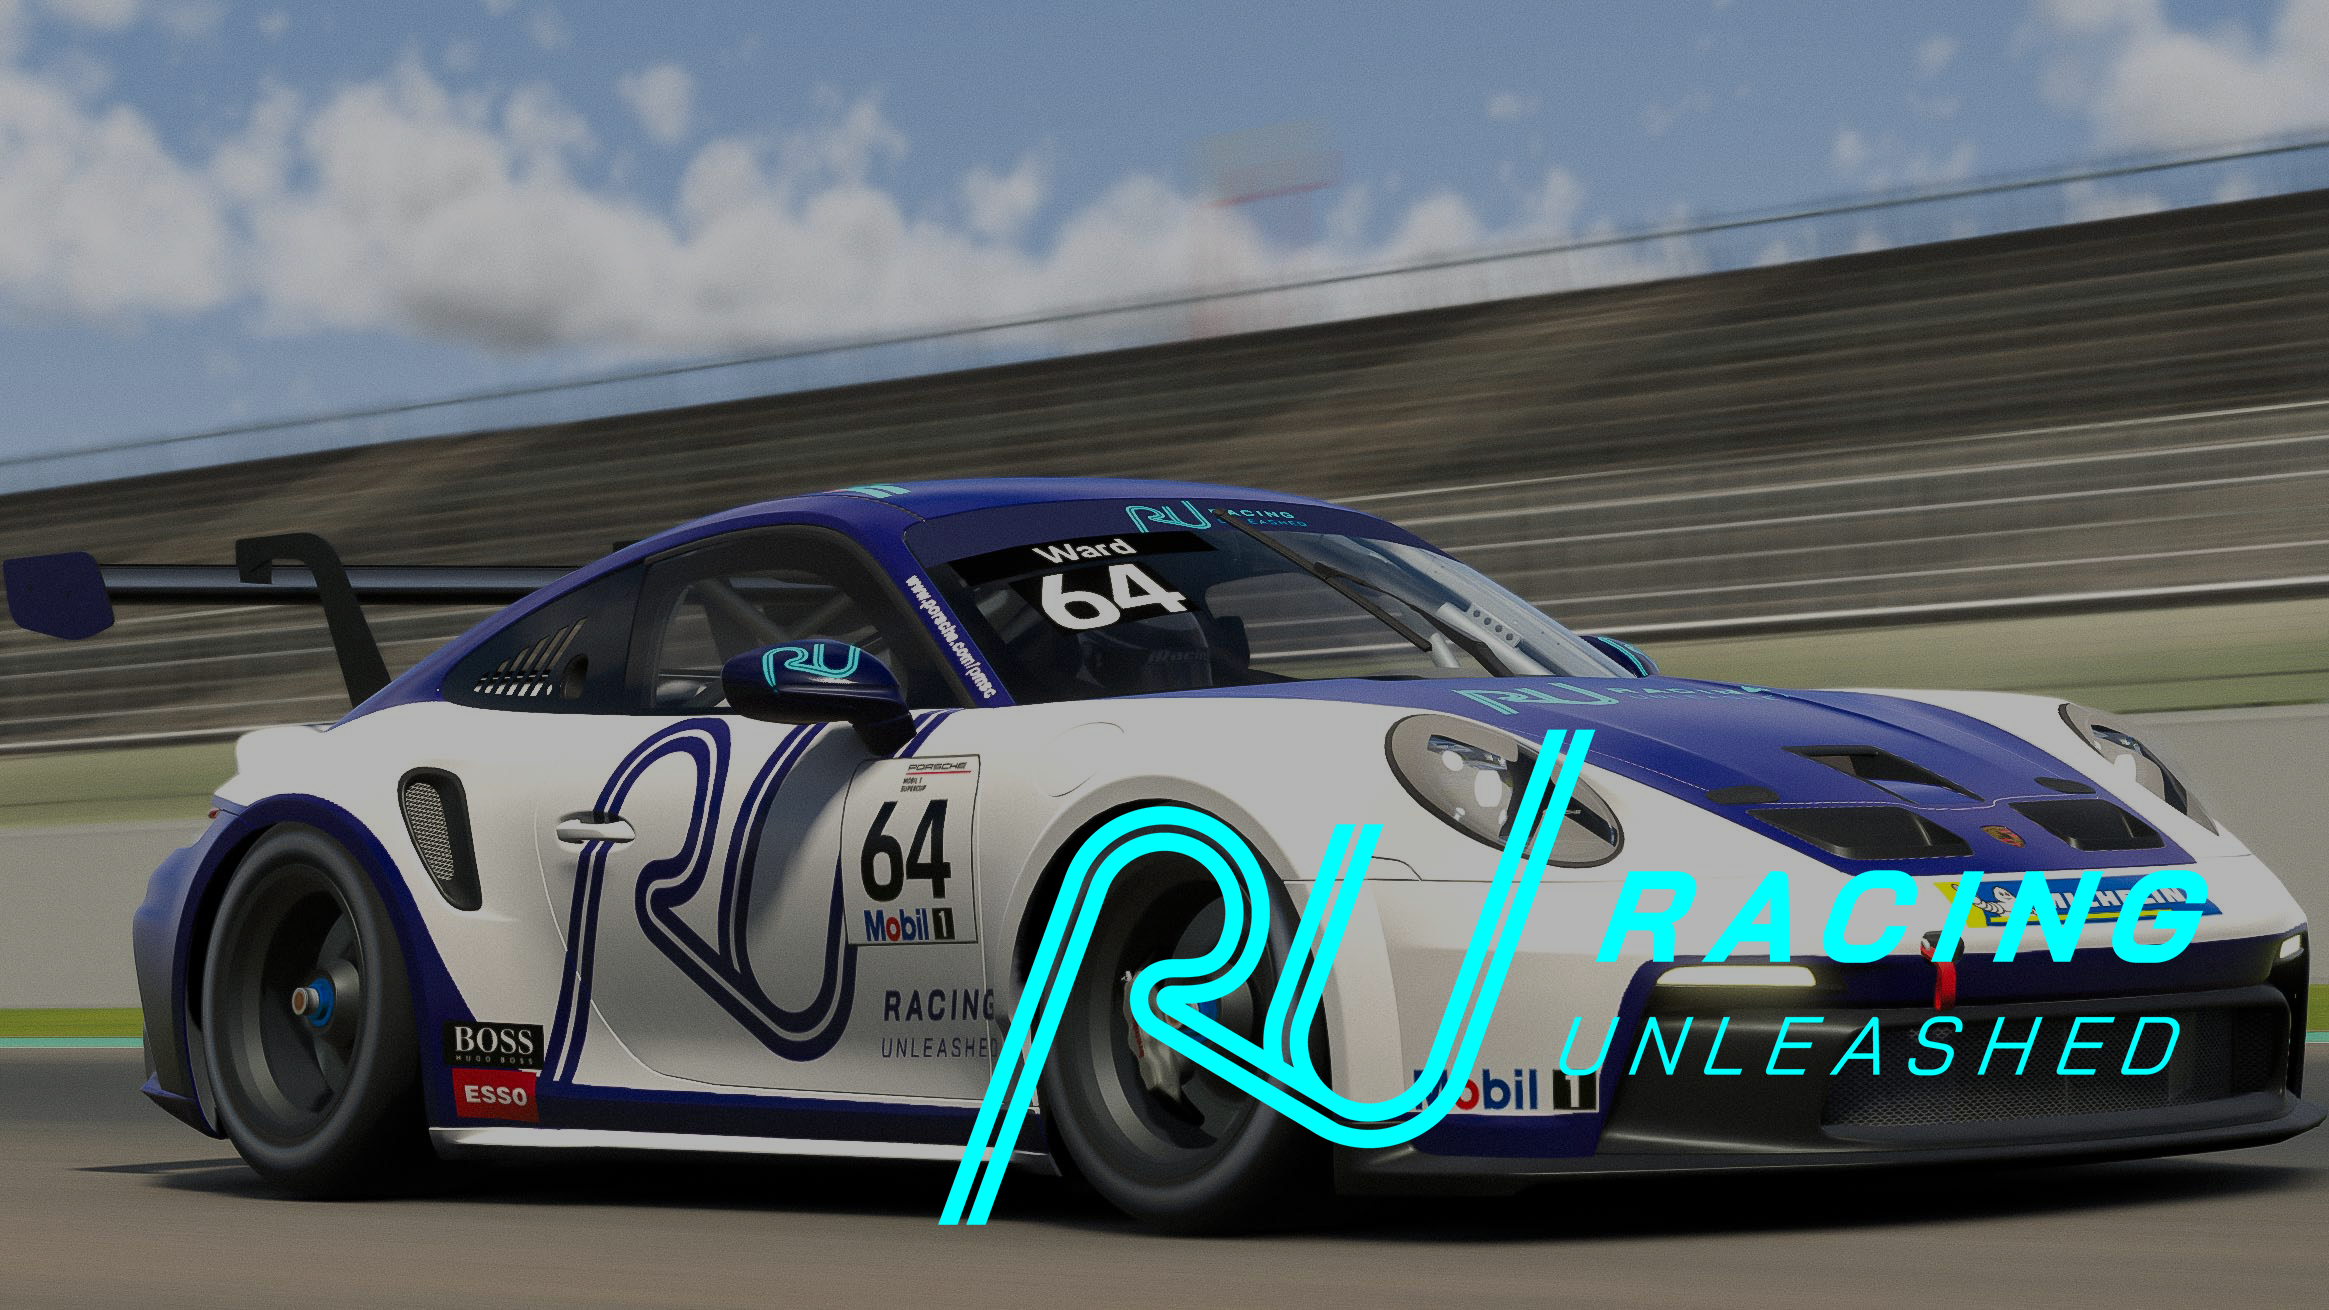 Join the Racing Unleashed Challenges!